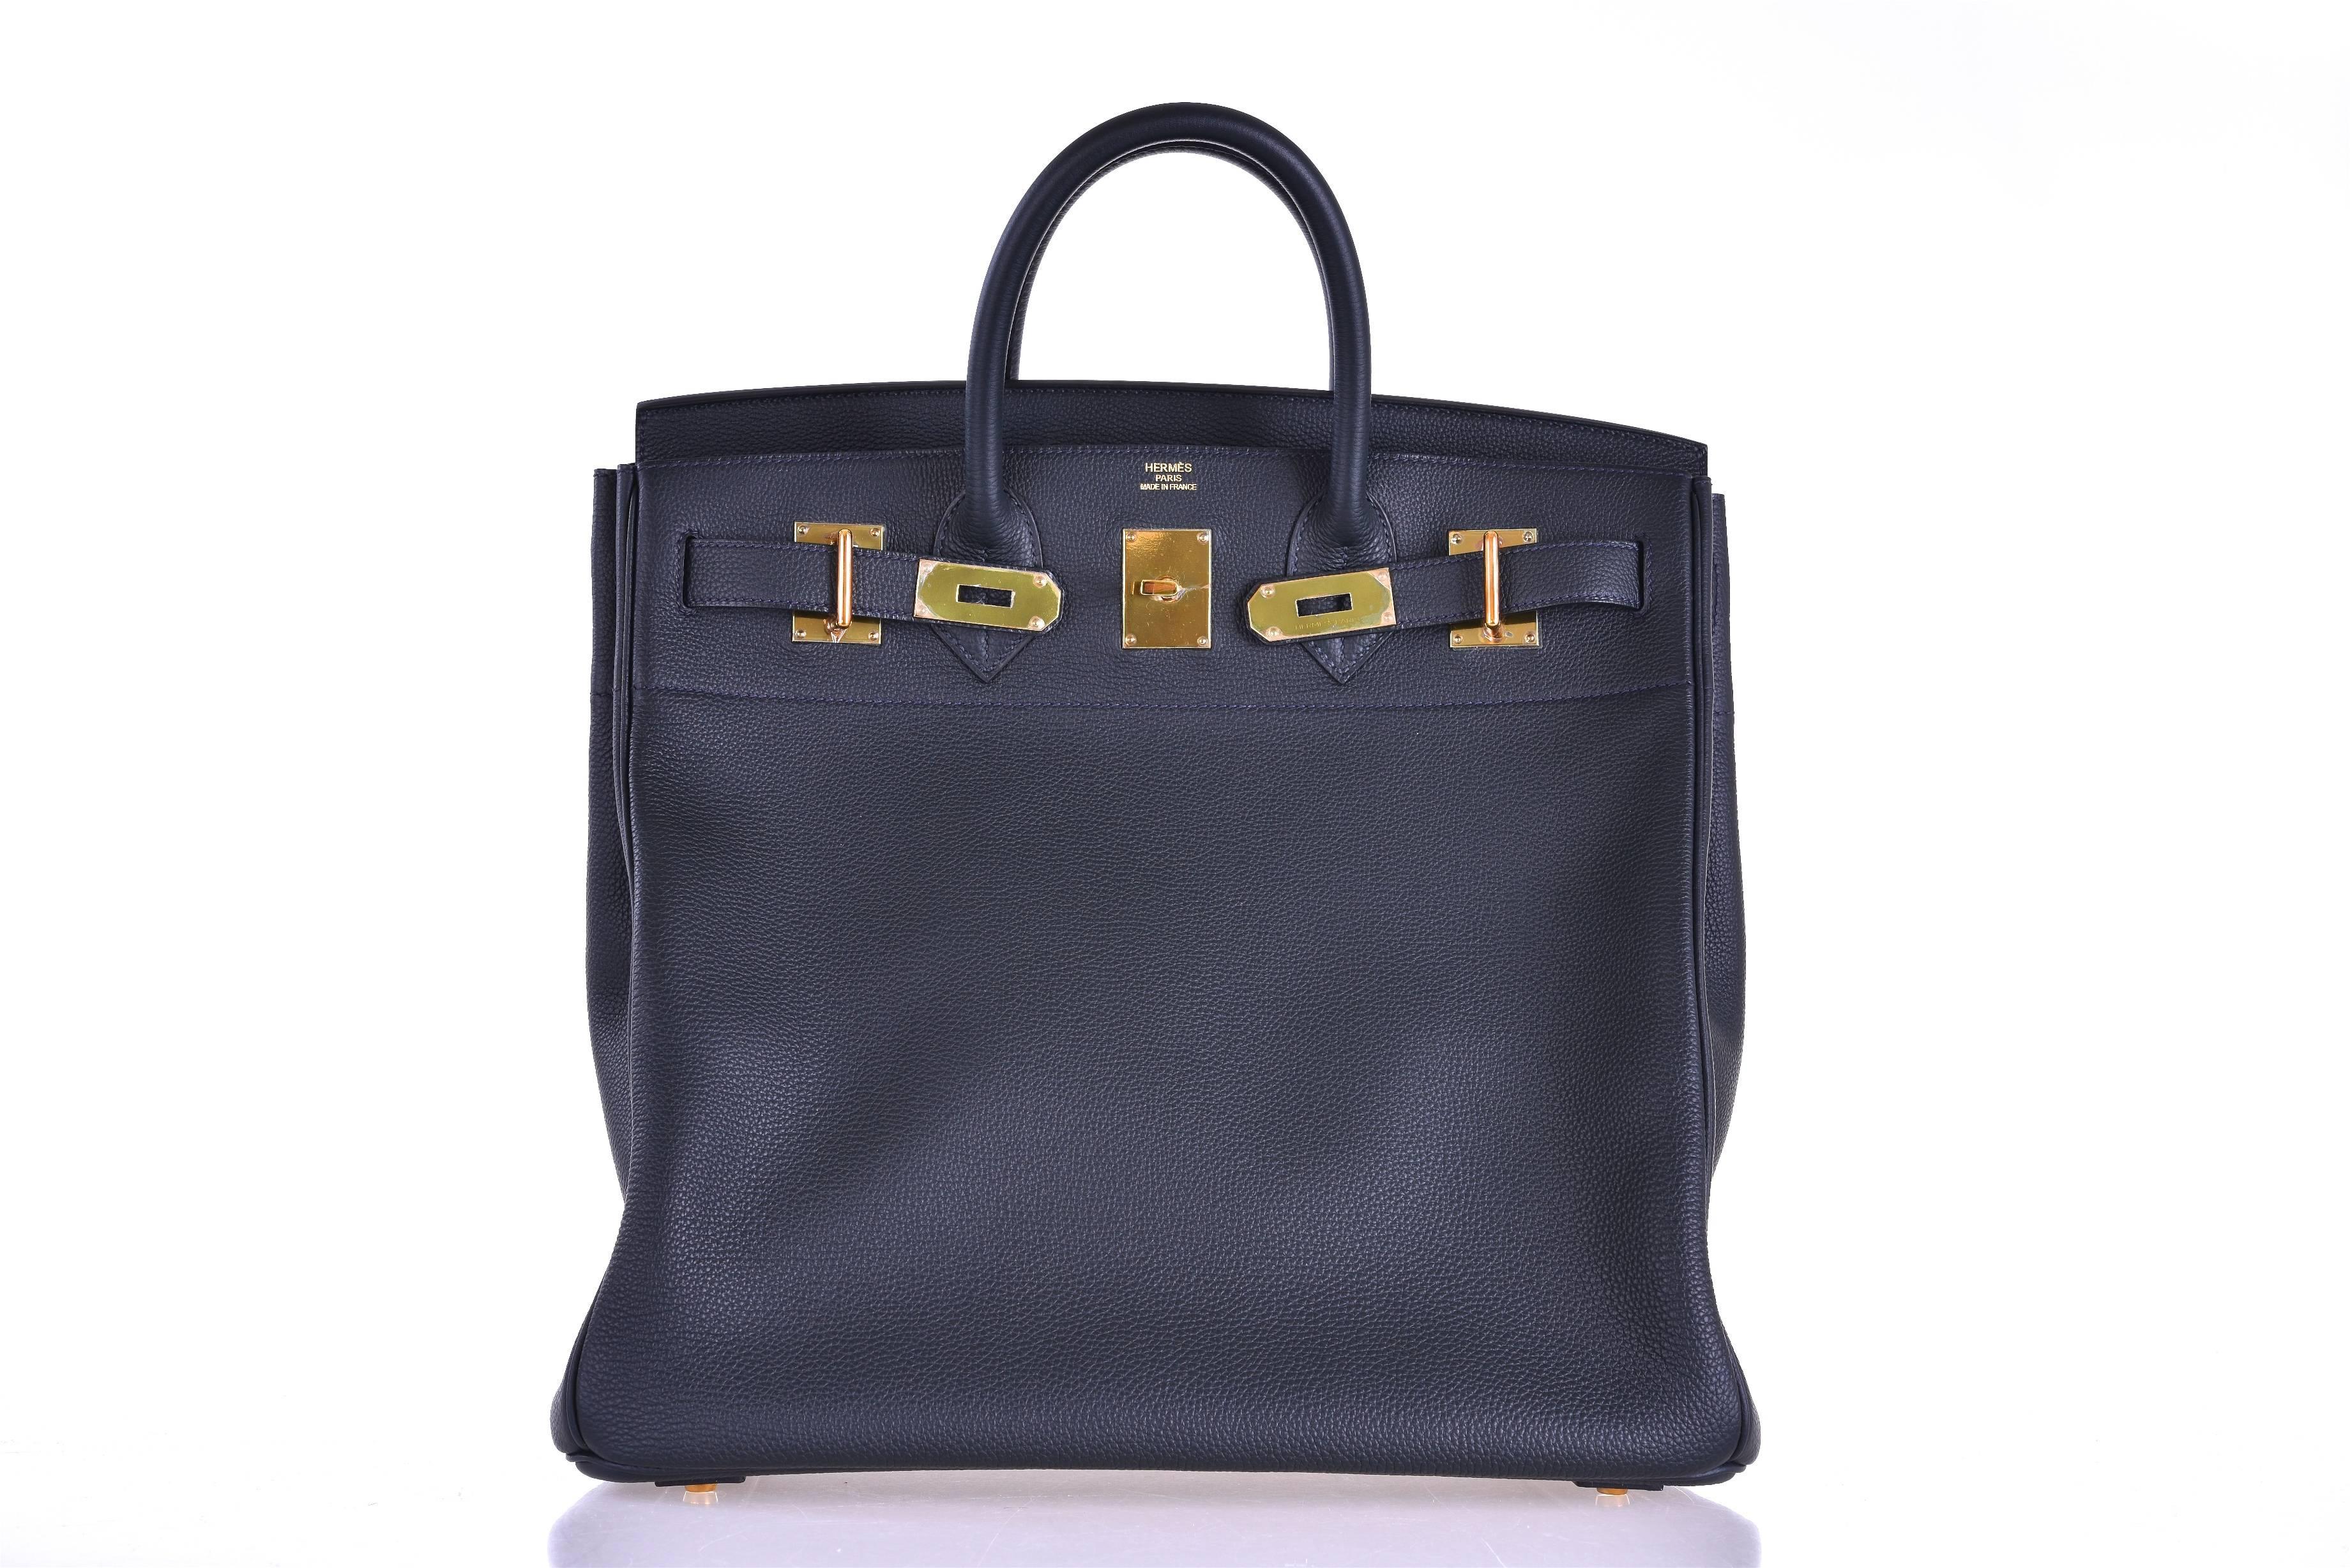 Hermes Hac Bleu OceanTogo Leather 40cm  Bag with Gold Hardware.

New Condition
16